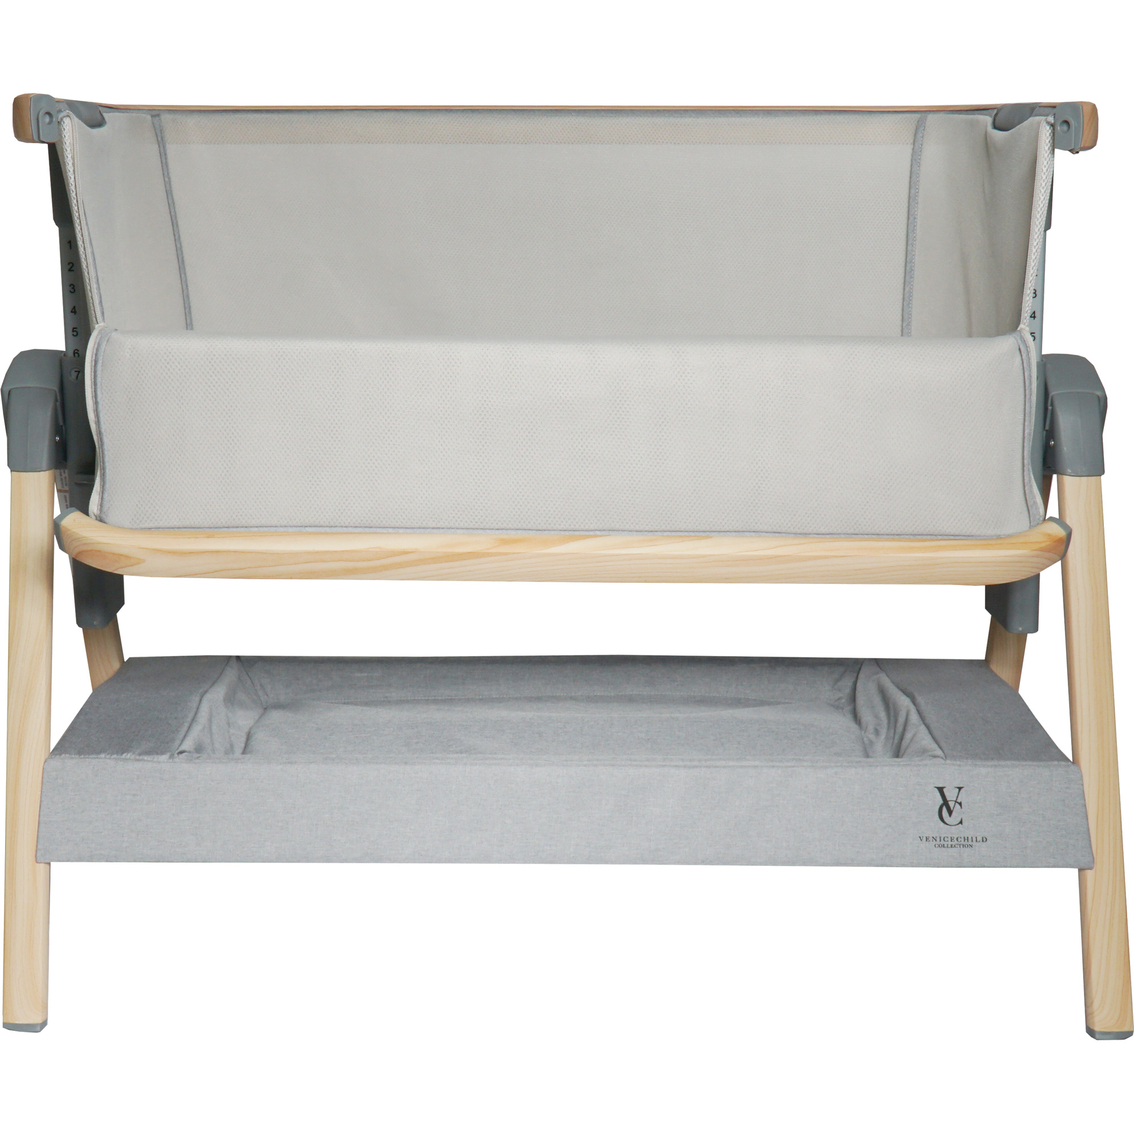 Venice Child California Dreaming Gray Wood Bedside Bassinet - Image 2 of 7